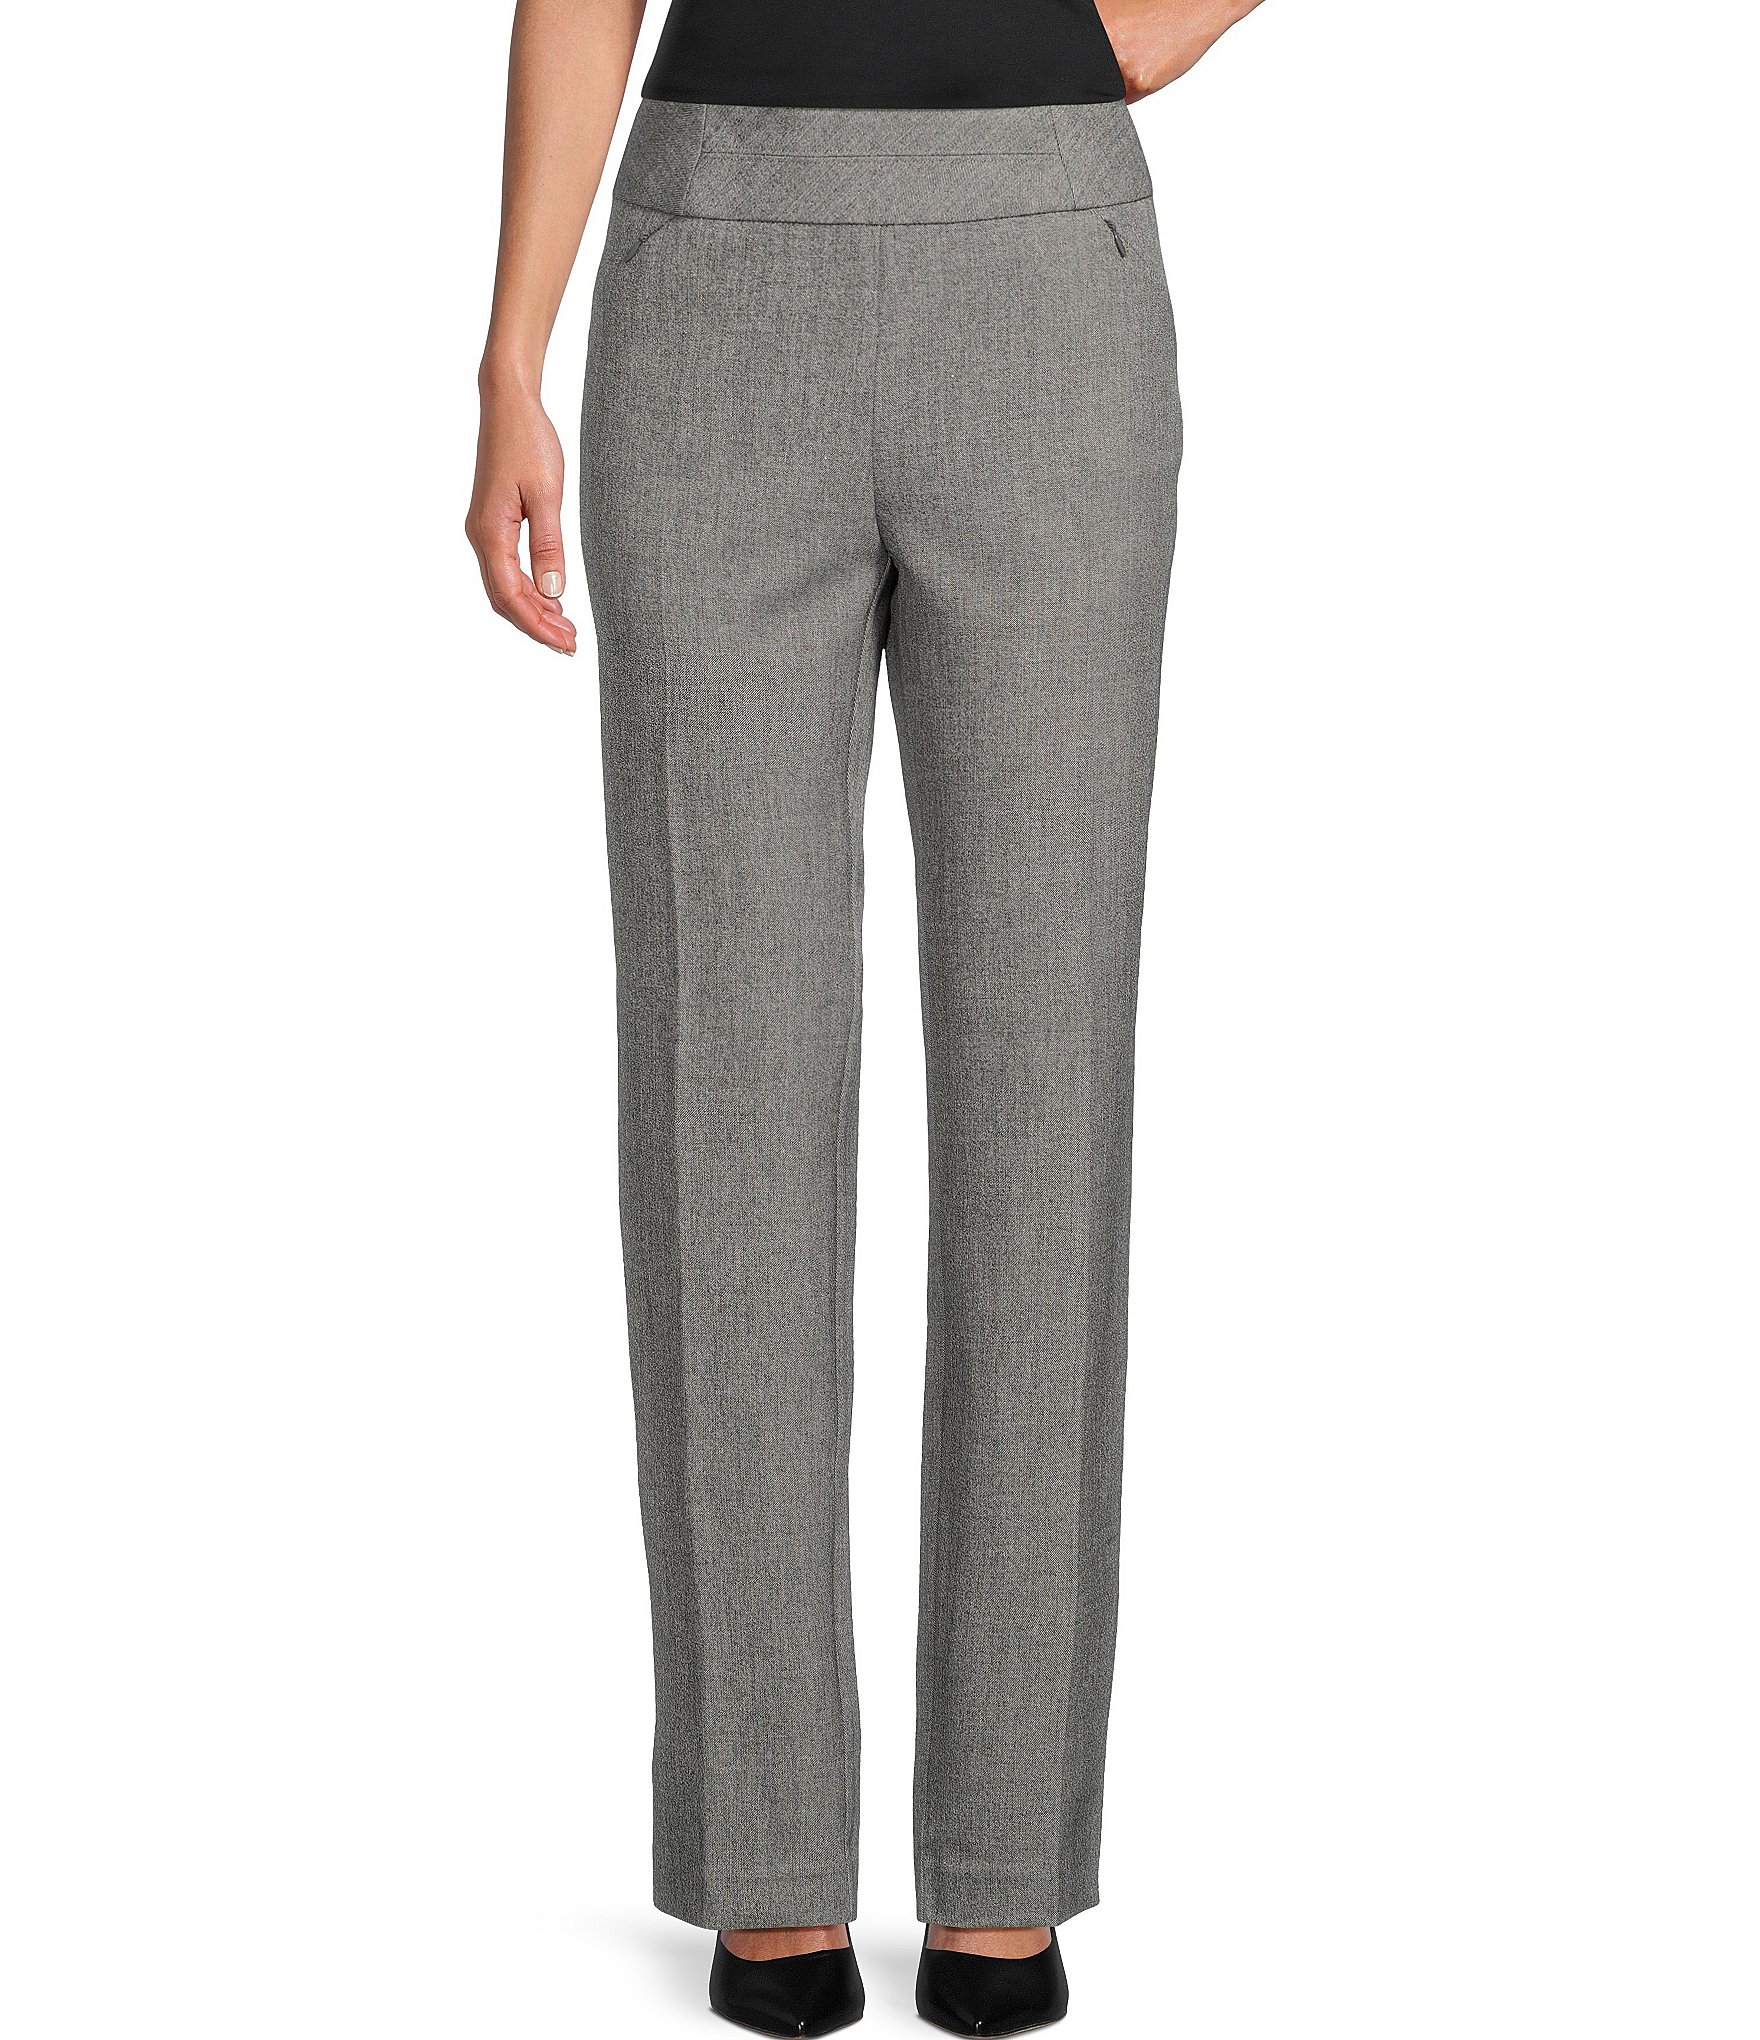 Buy the NWT Womens Gray Flat Front Mid Rise Straight Leg Dress Pants Size 8  Tall